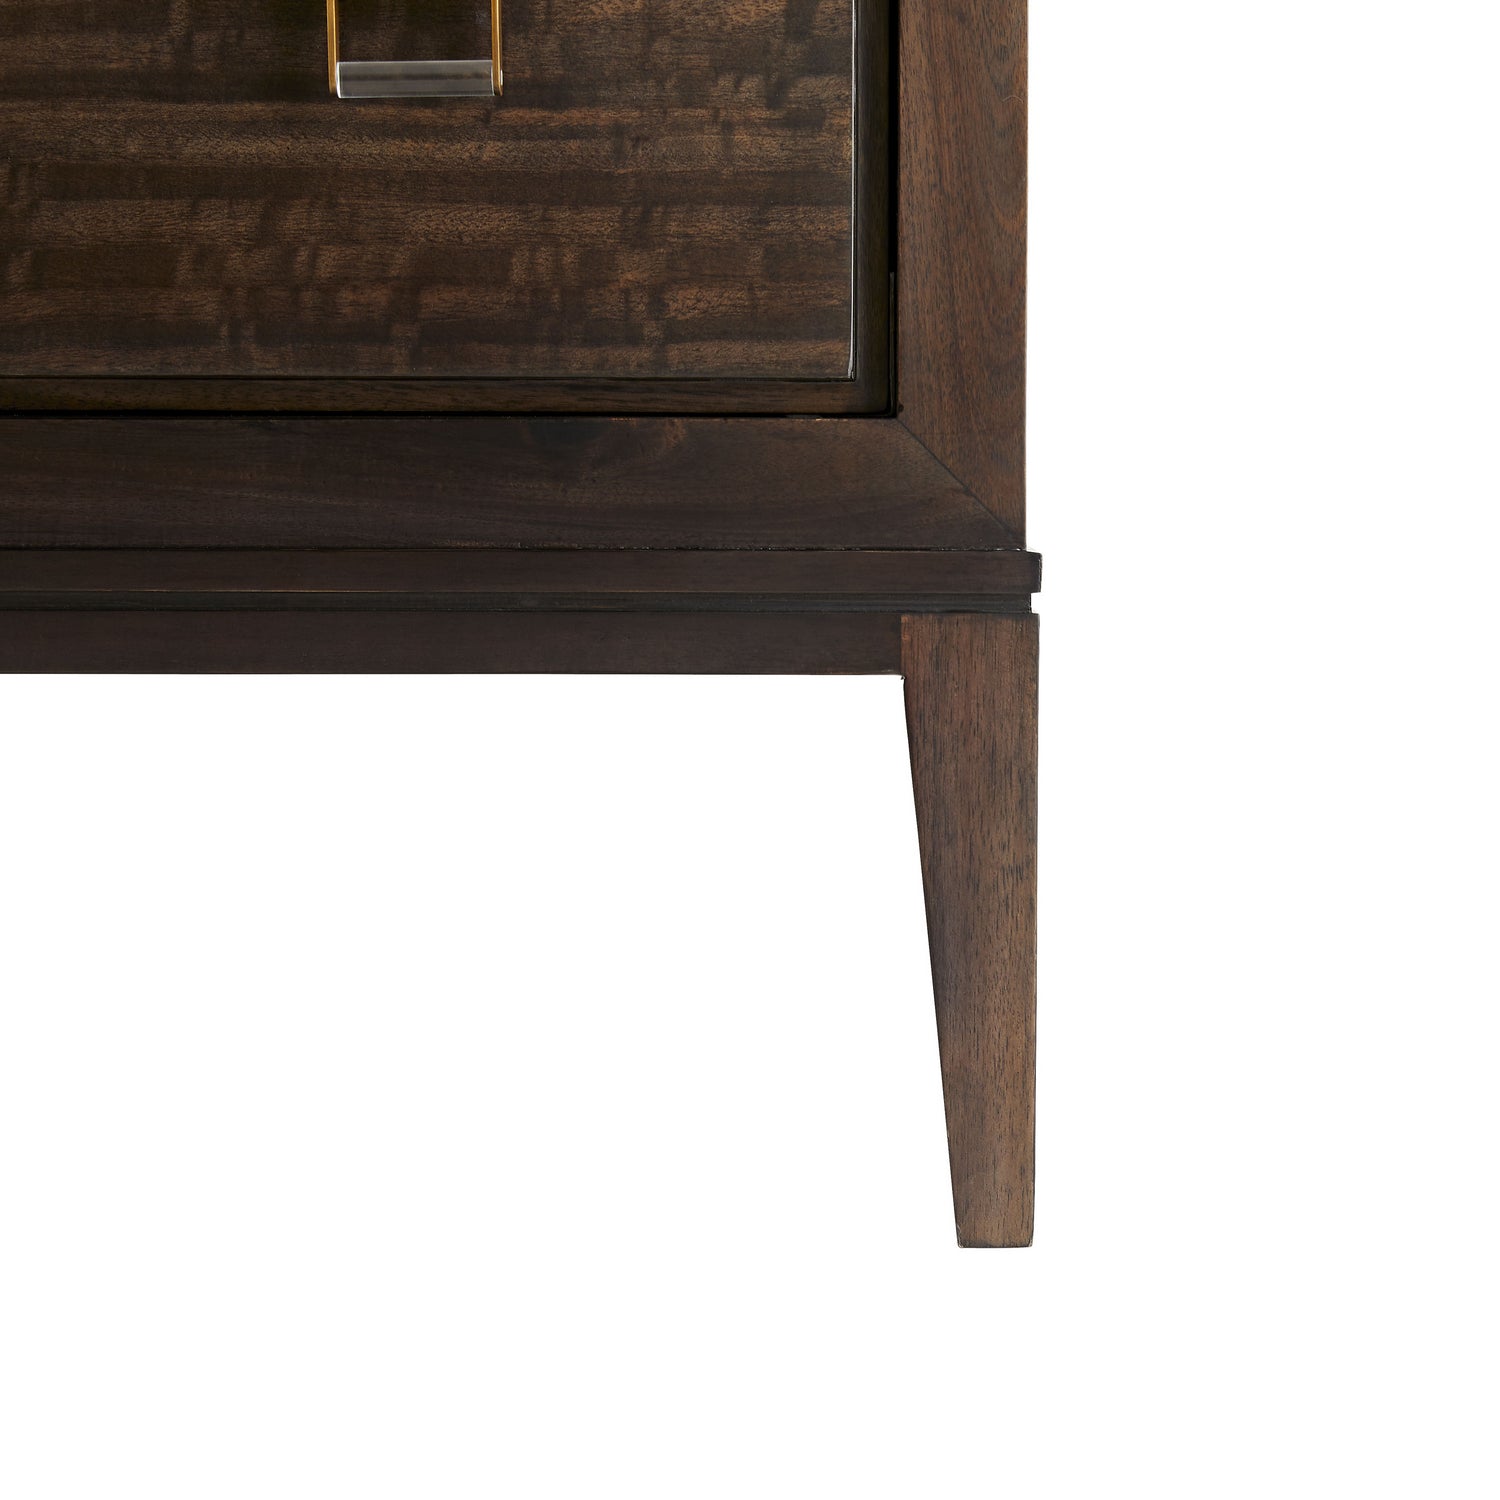 Chest from the Ethan collection in Brindle finish